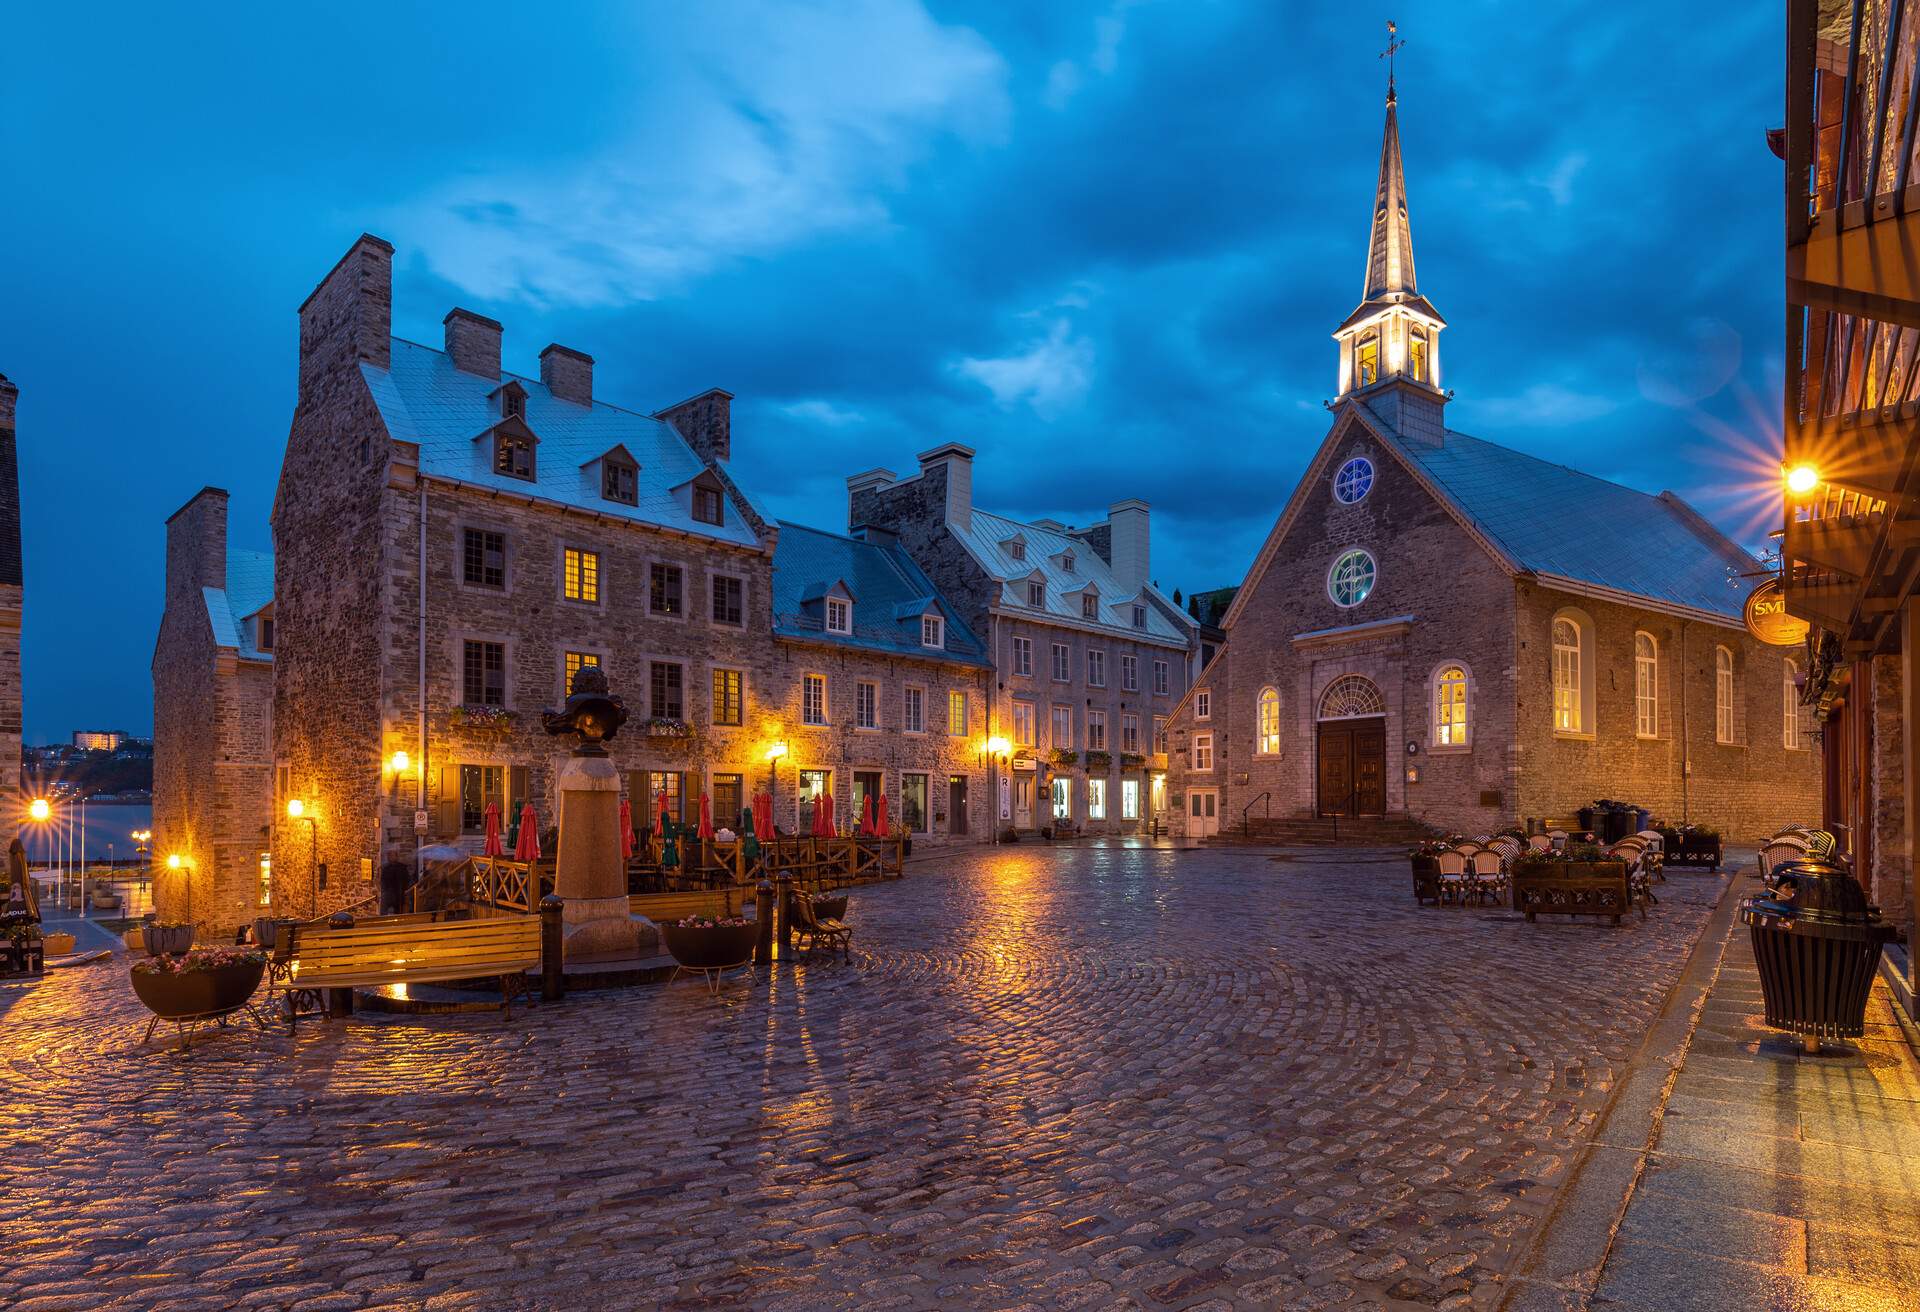 This is a photo of Notre-Dame-des-Victoires, Roman Catholic stone church on Place Royale in the lower town of Old Quebec City. Construction was started in 1687 on the site of Champlain's habitation and was completed in 1723. The church is one of the oldest in North America.